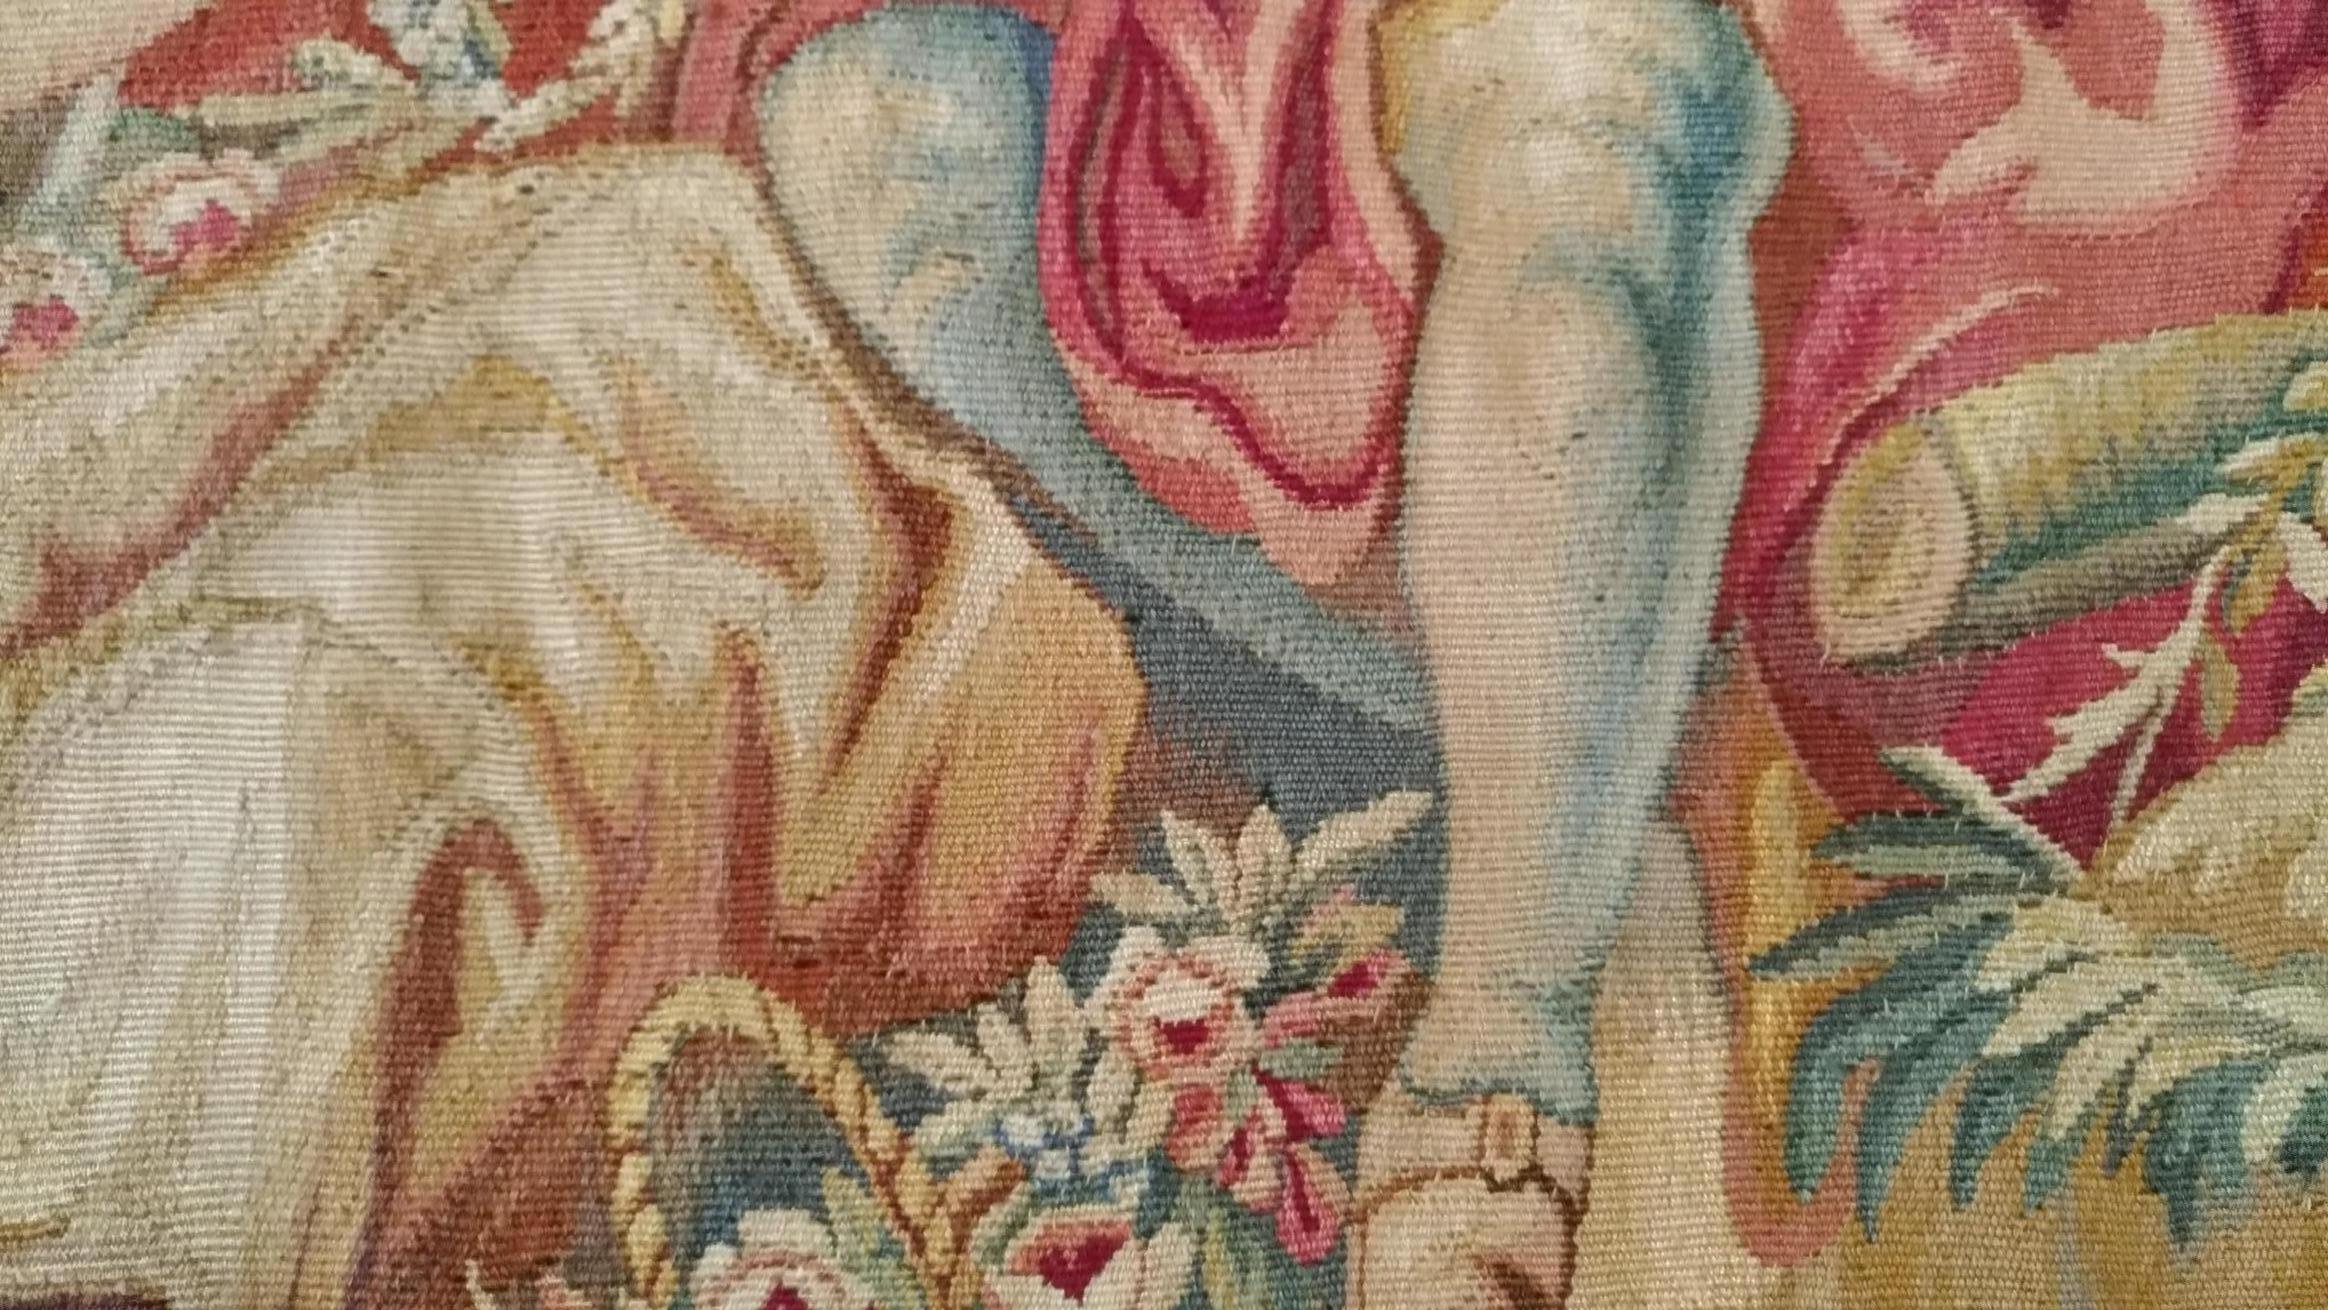 1013 - luxurious 20th century Aubusson tapestry with a beautiful romantic design.